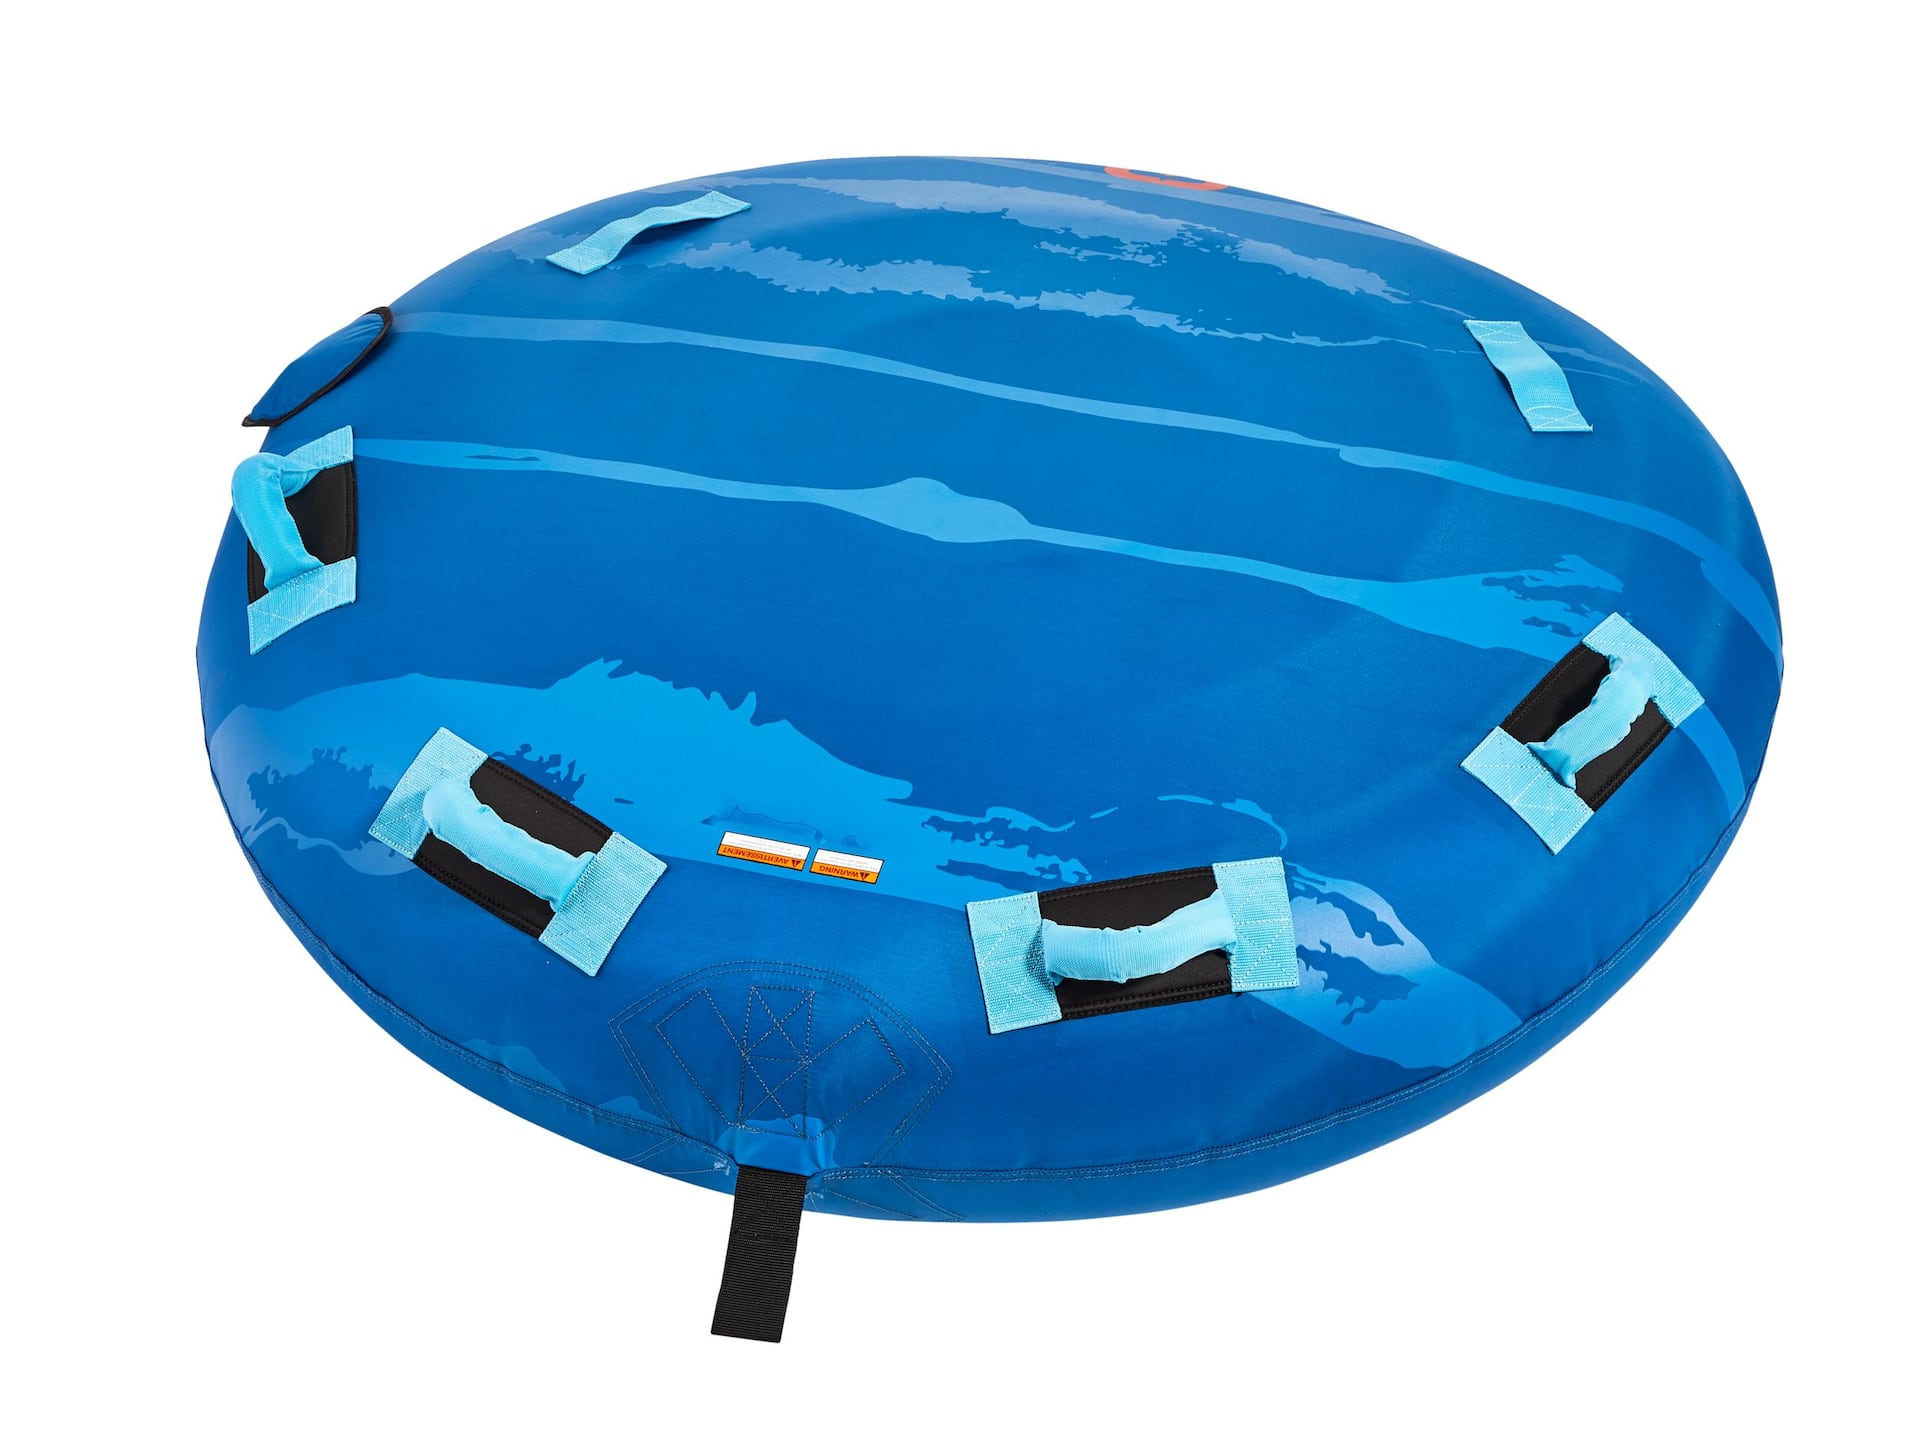 Outbound Air-Pump Inflatable Water Boating 1-Rider Towable Tube, White/Blue